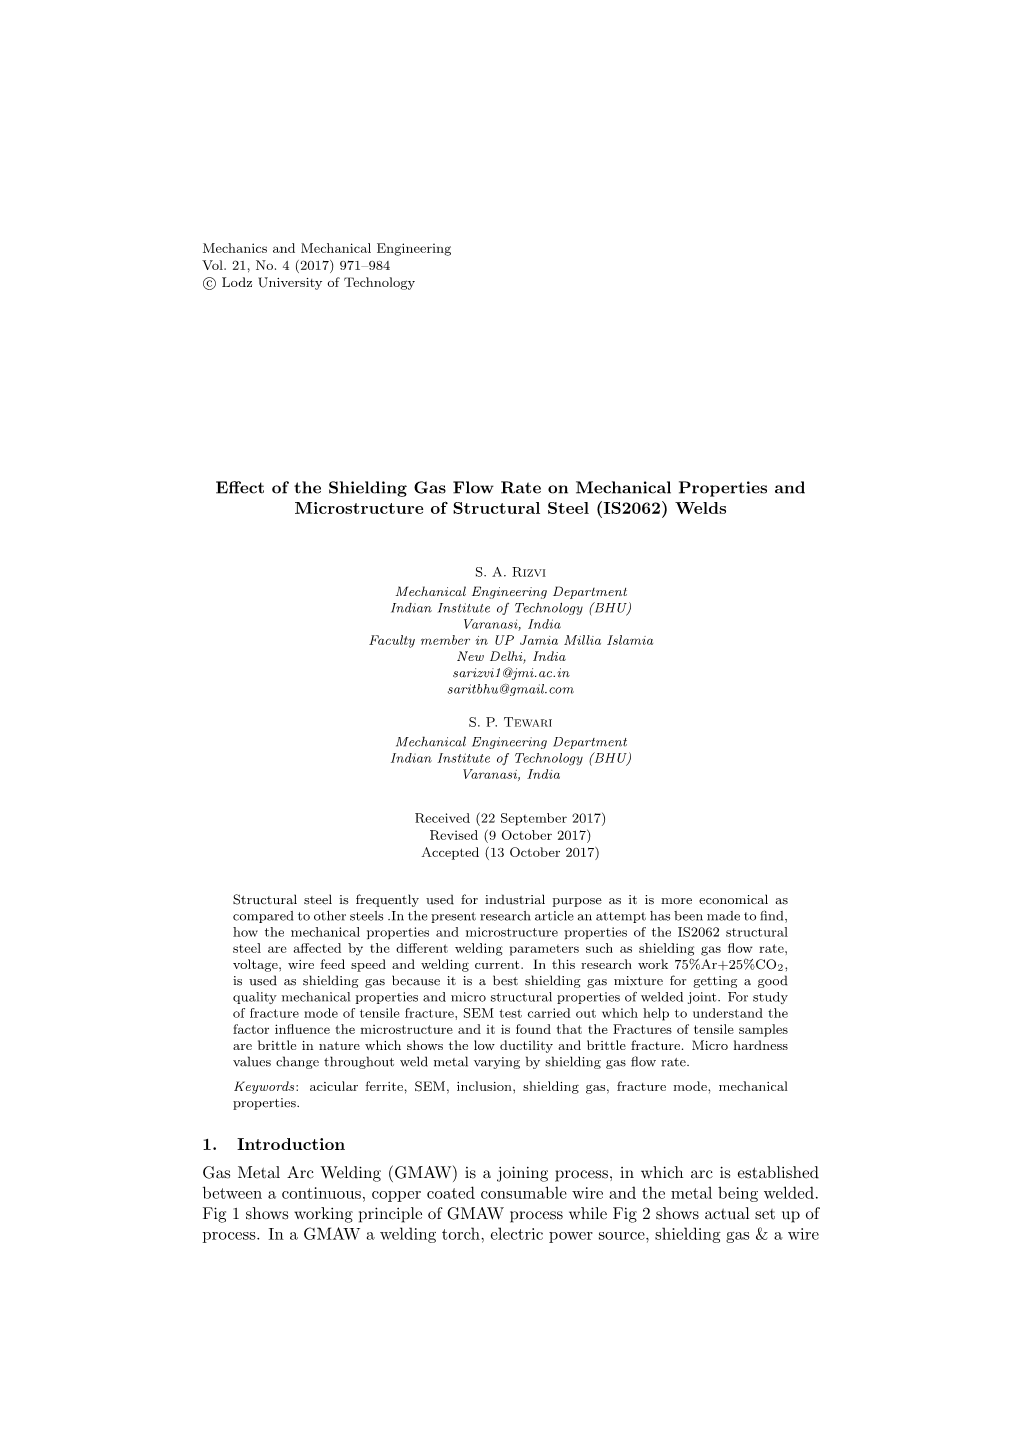 Effect of the Shielding Gas Flow Rate on Mechanical Properties And